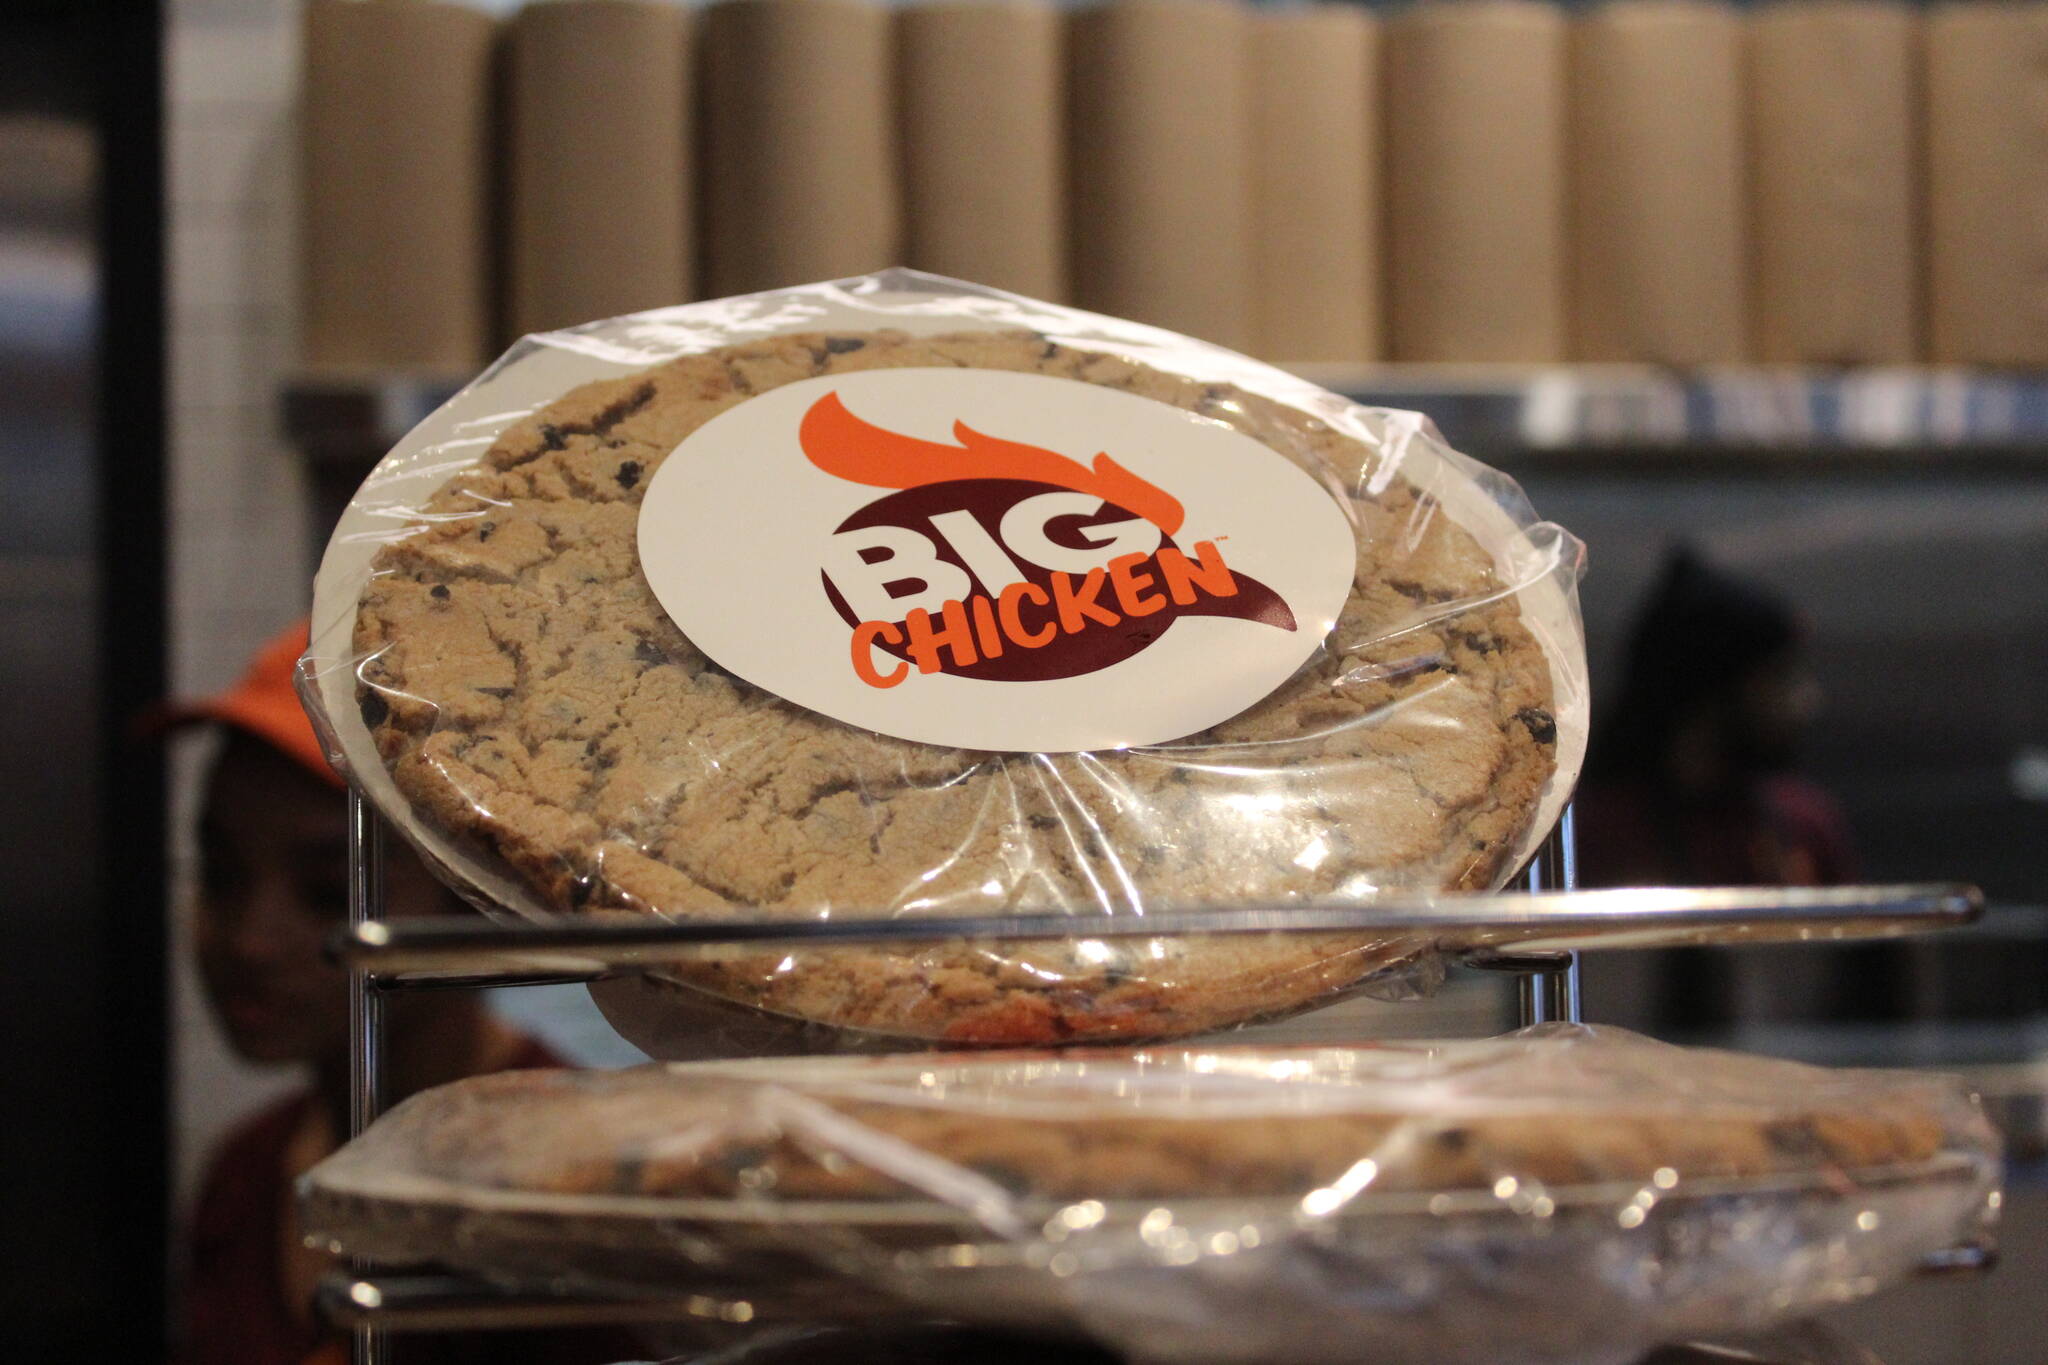 The Big Chicken’s Big Cookie is the size of basketball. Photo by Bailey Jo Josie/Sound Publishing.